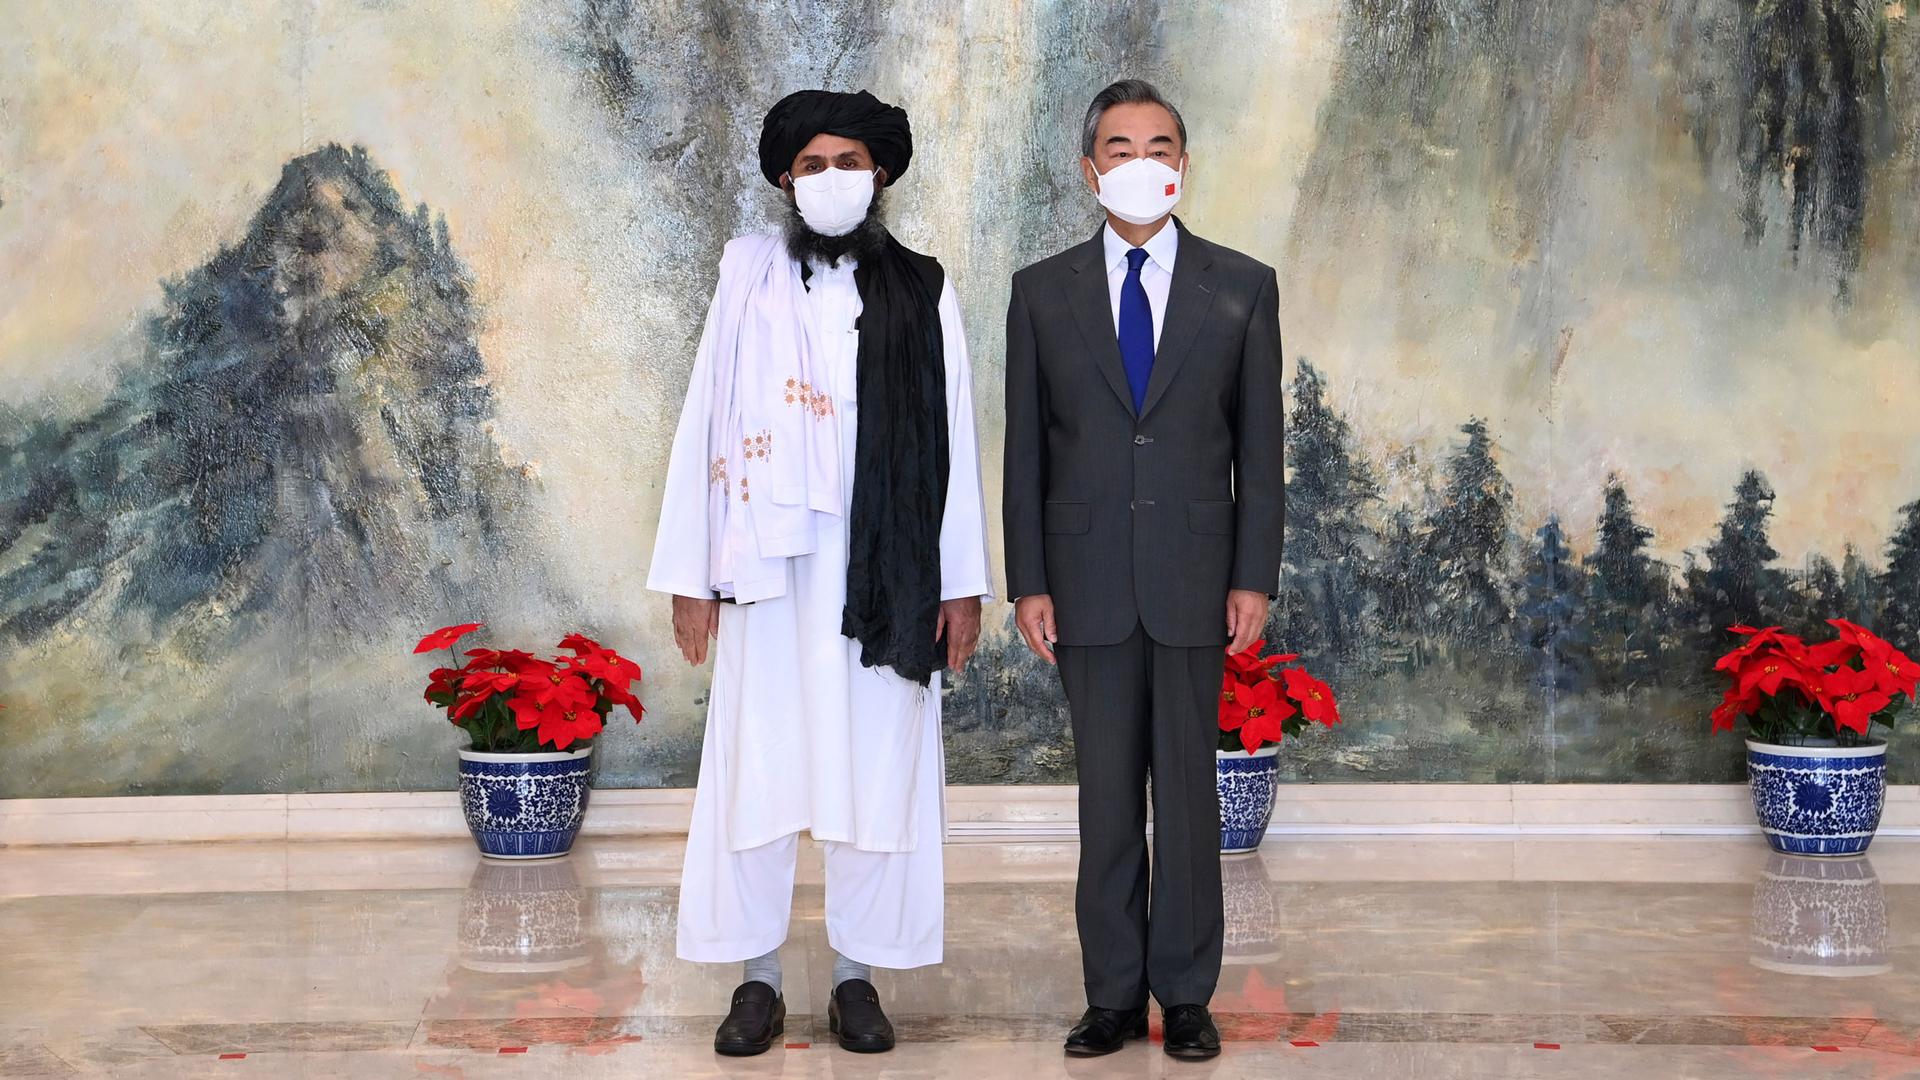 Taliban co-founder Mullah Abdul Ghani Baradar is shown wearing traditional white robes while standing next to and Chinese Foreign Minister Wang Yi wearing a suit.